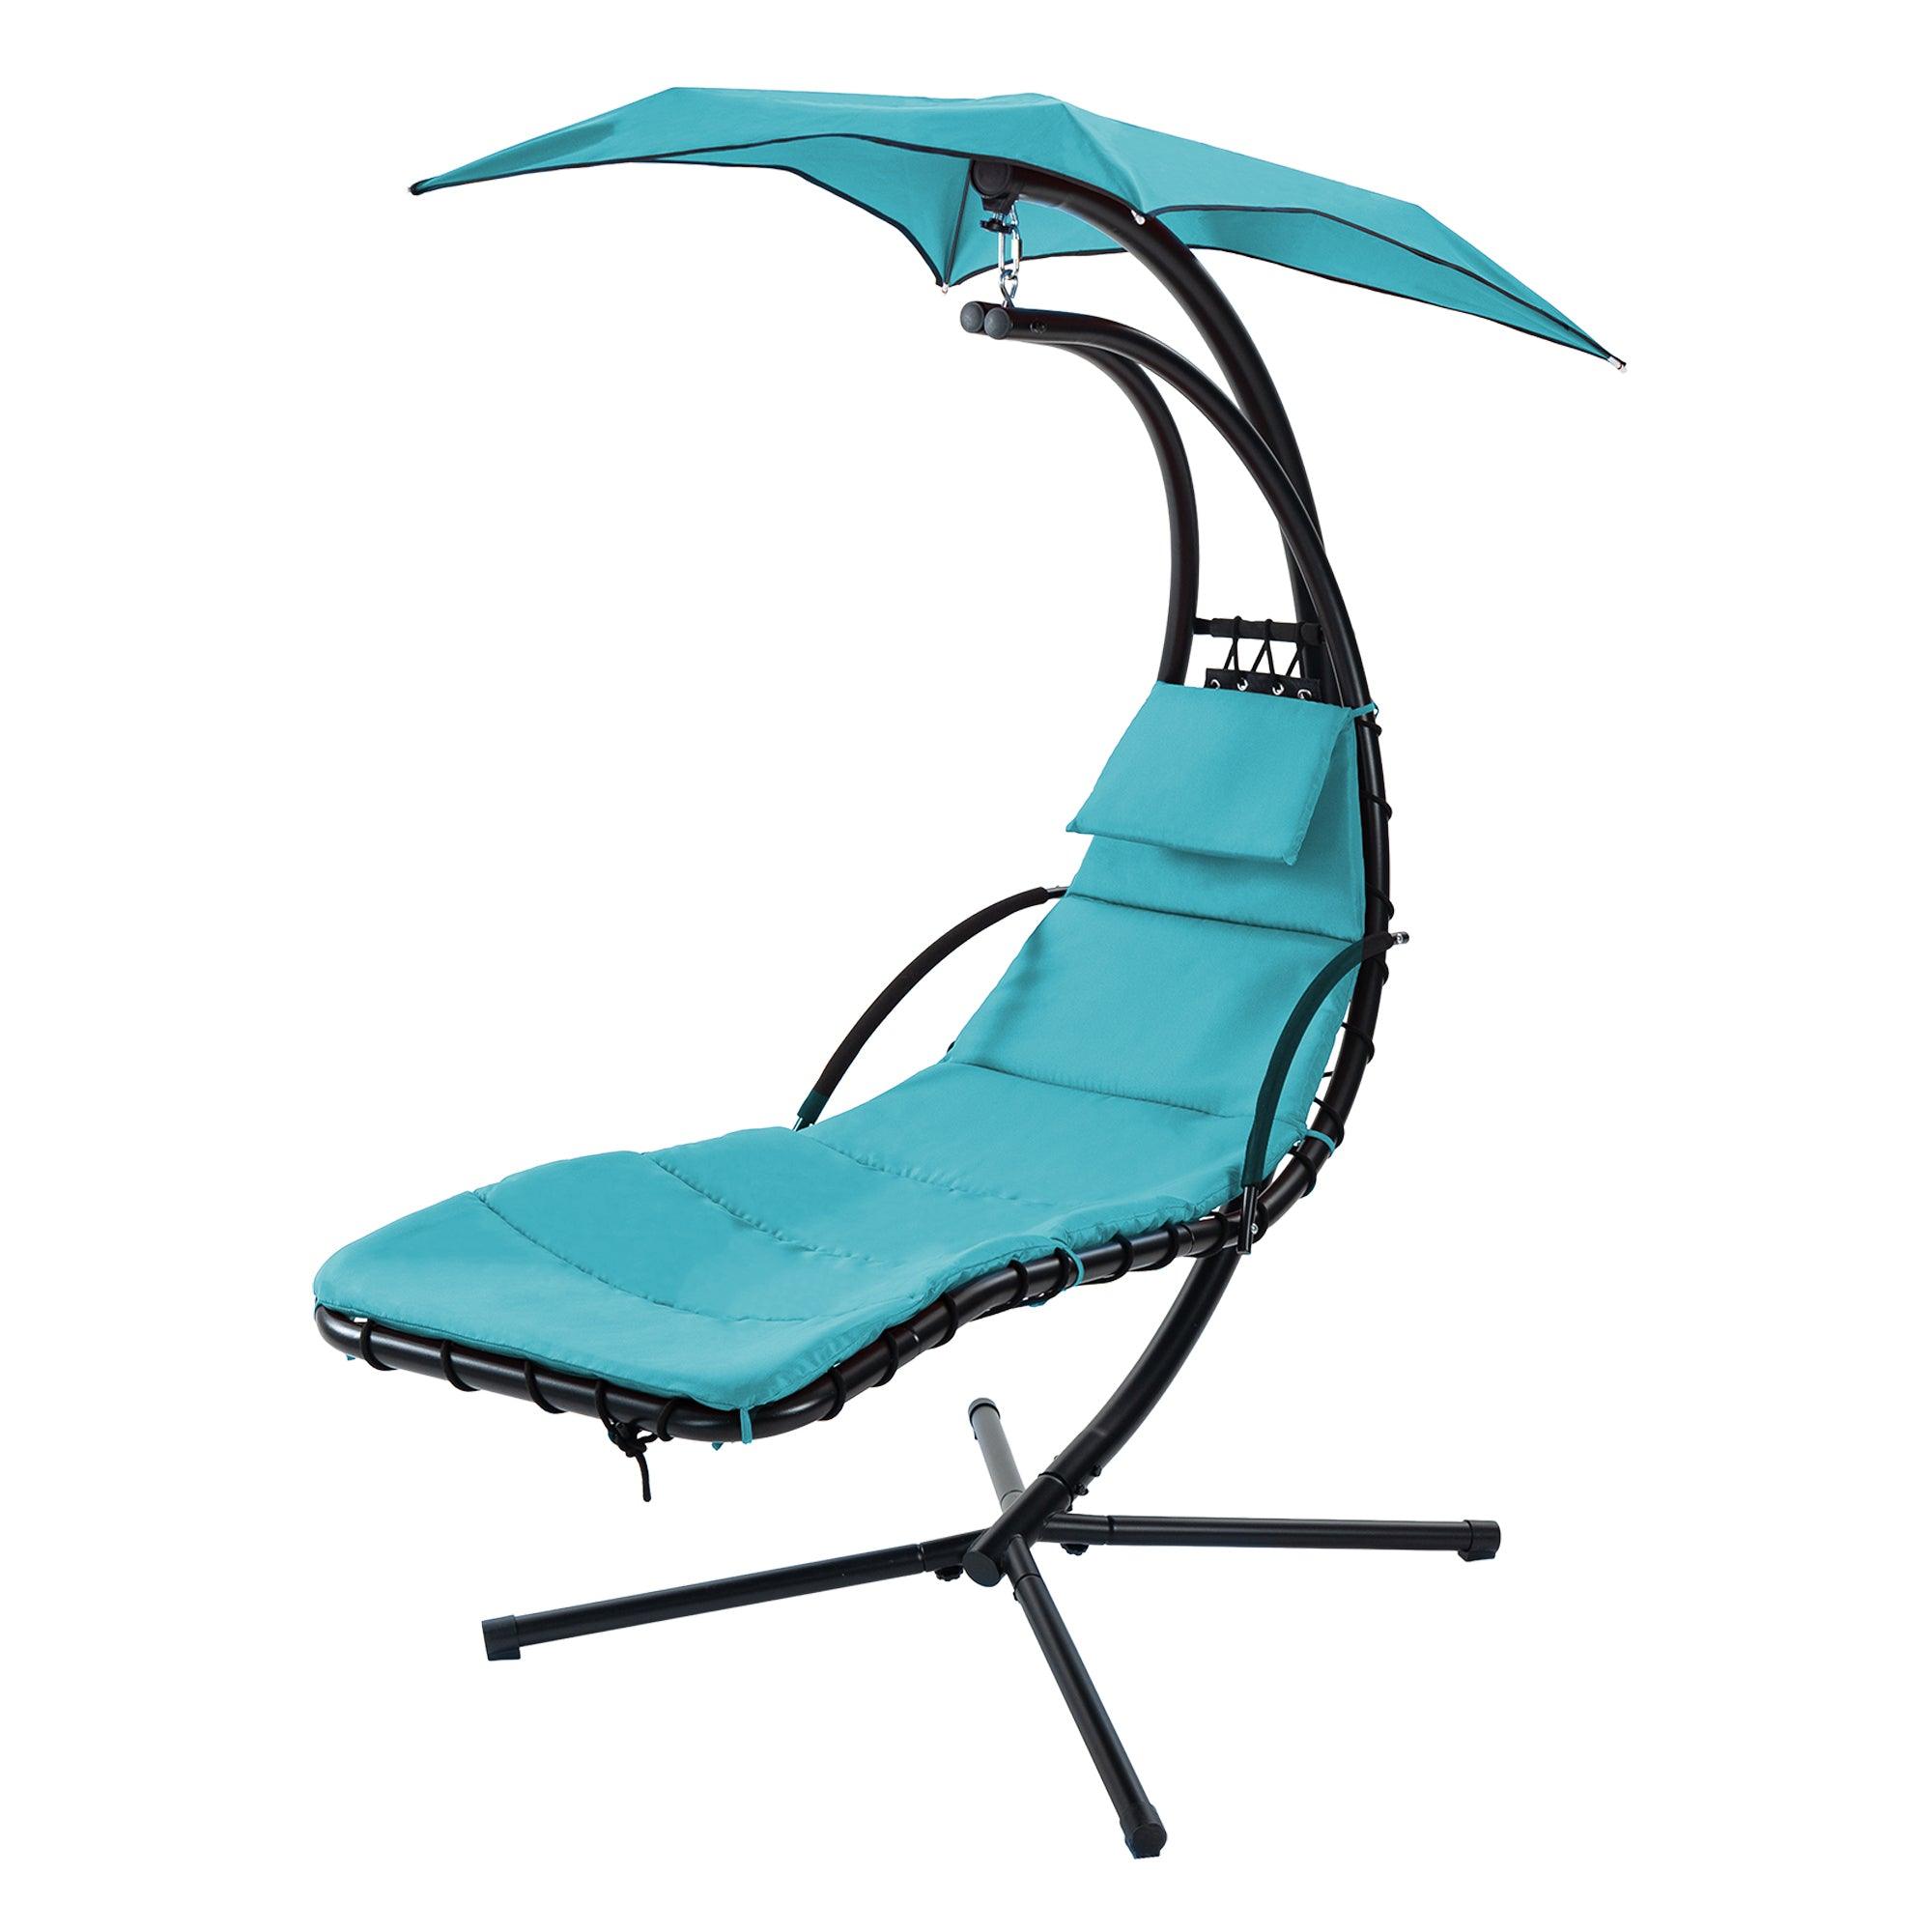 🆓🚛 Hanging Chaise Lounger with Removable Canopy, Outdoor Swing Chair with Built-in Pillow, Hanging Curved Chaise Lounge Chair Swing for Patio Porch Poolside, Hammock Chair with Stand Blue